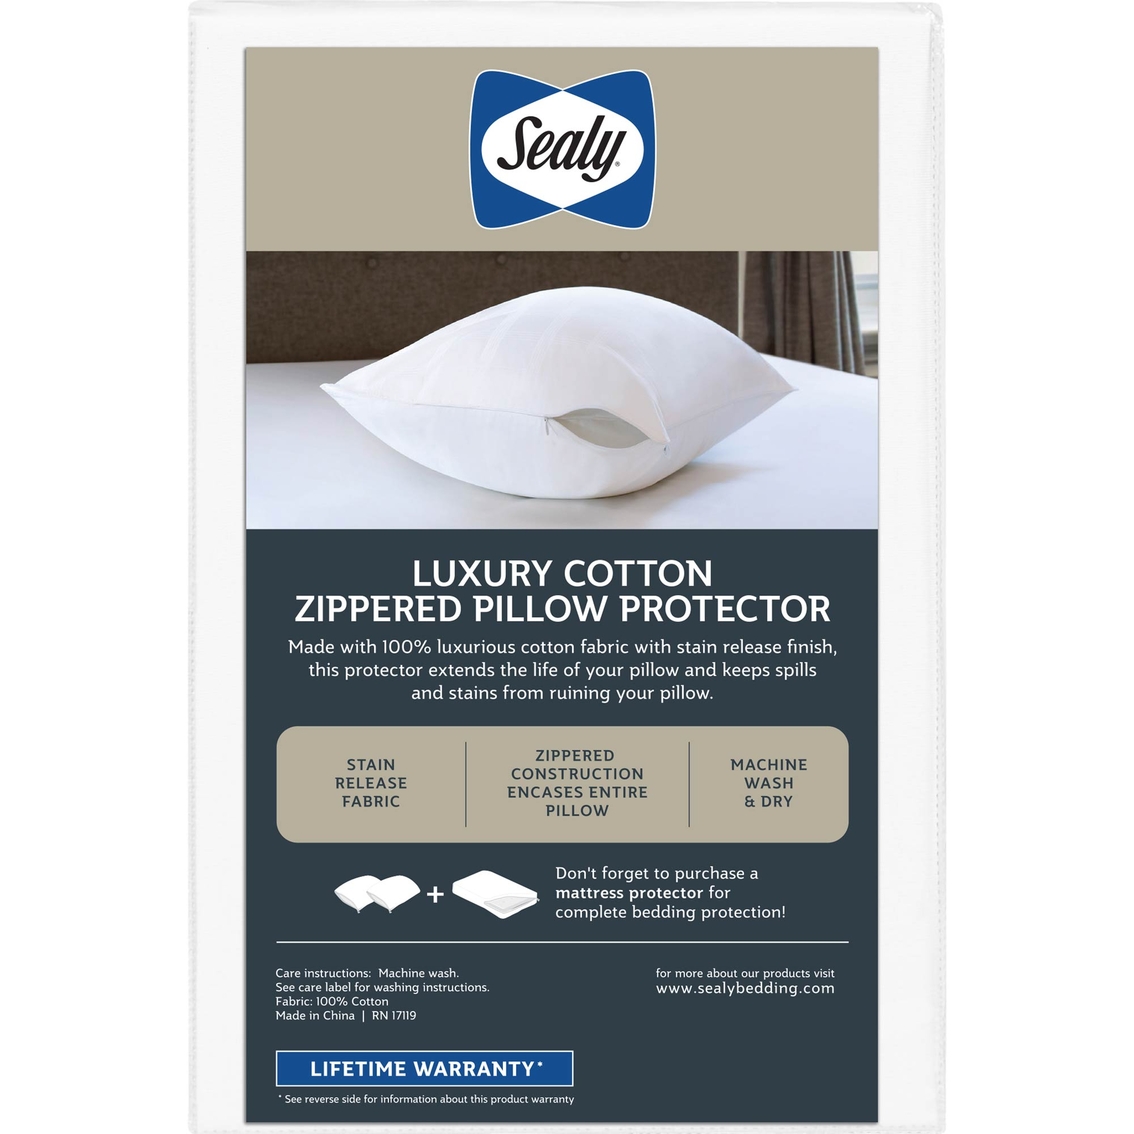 Sealy Luxury Cotton Pillow Protector - Image 2 of 7